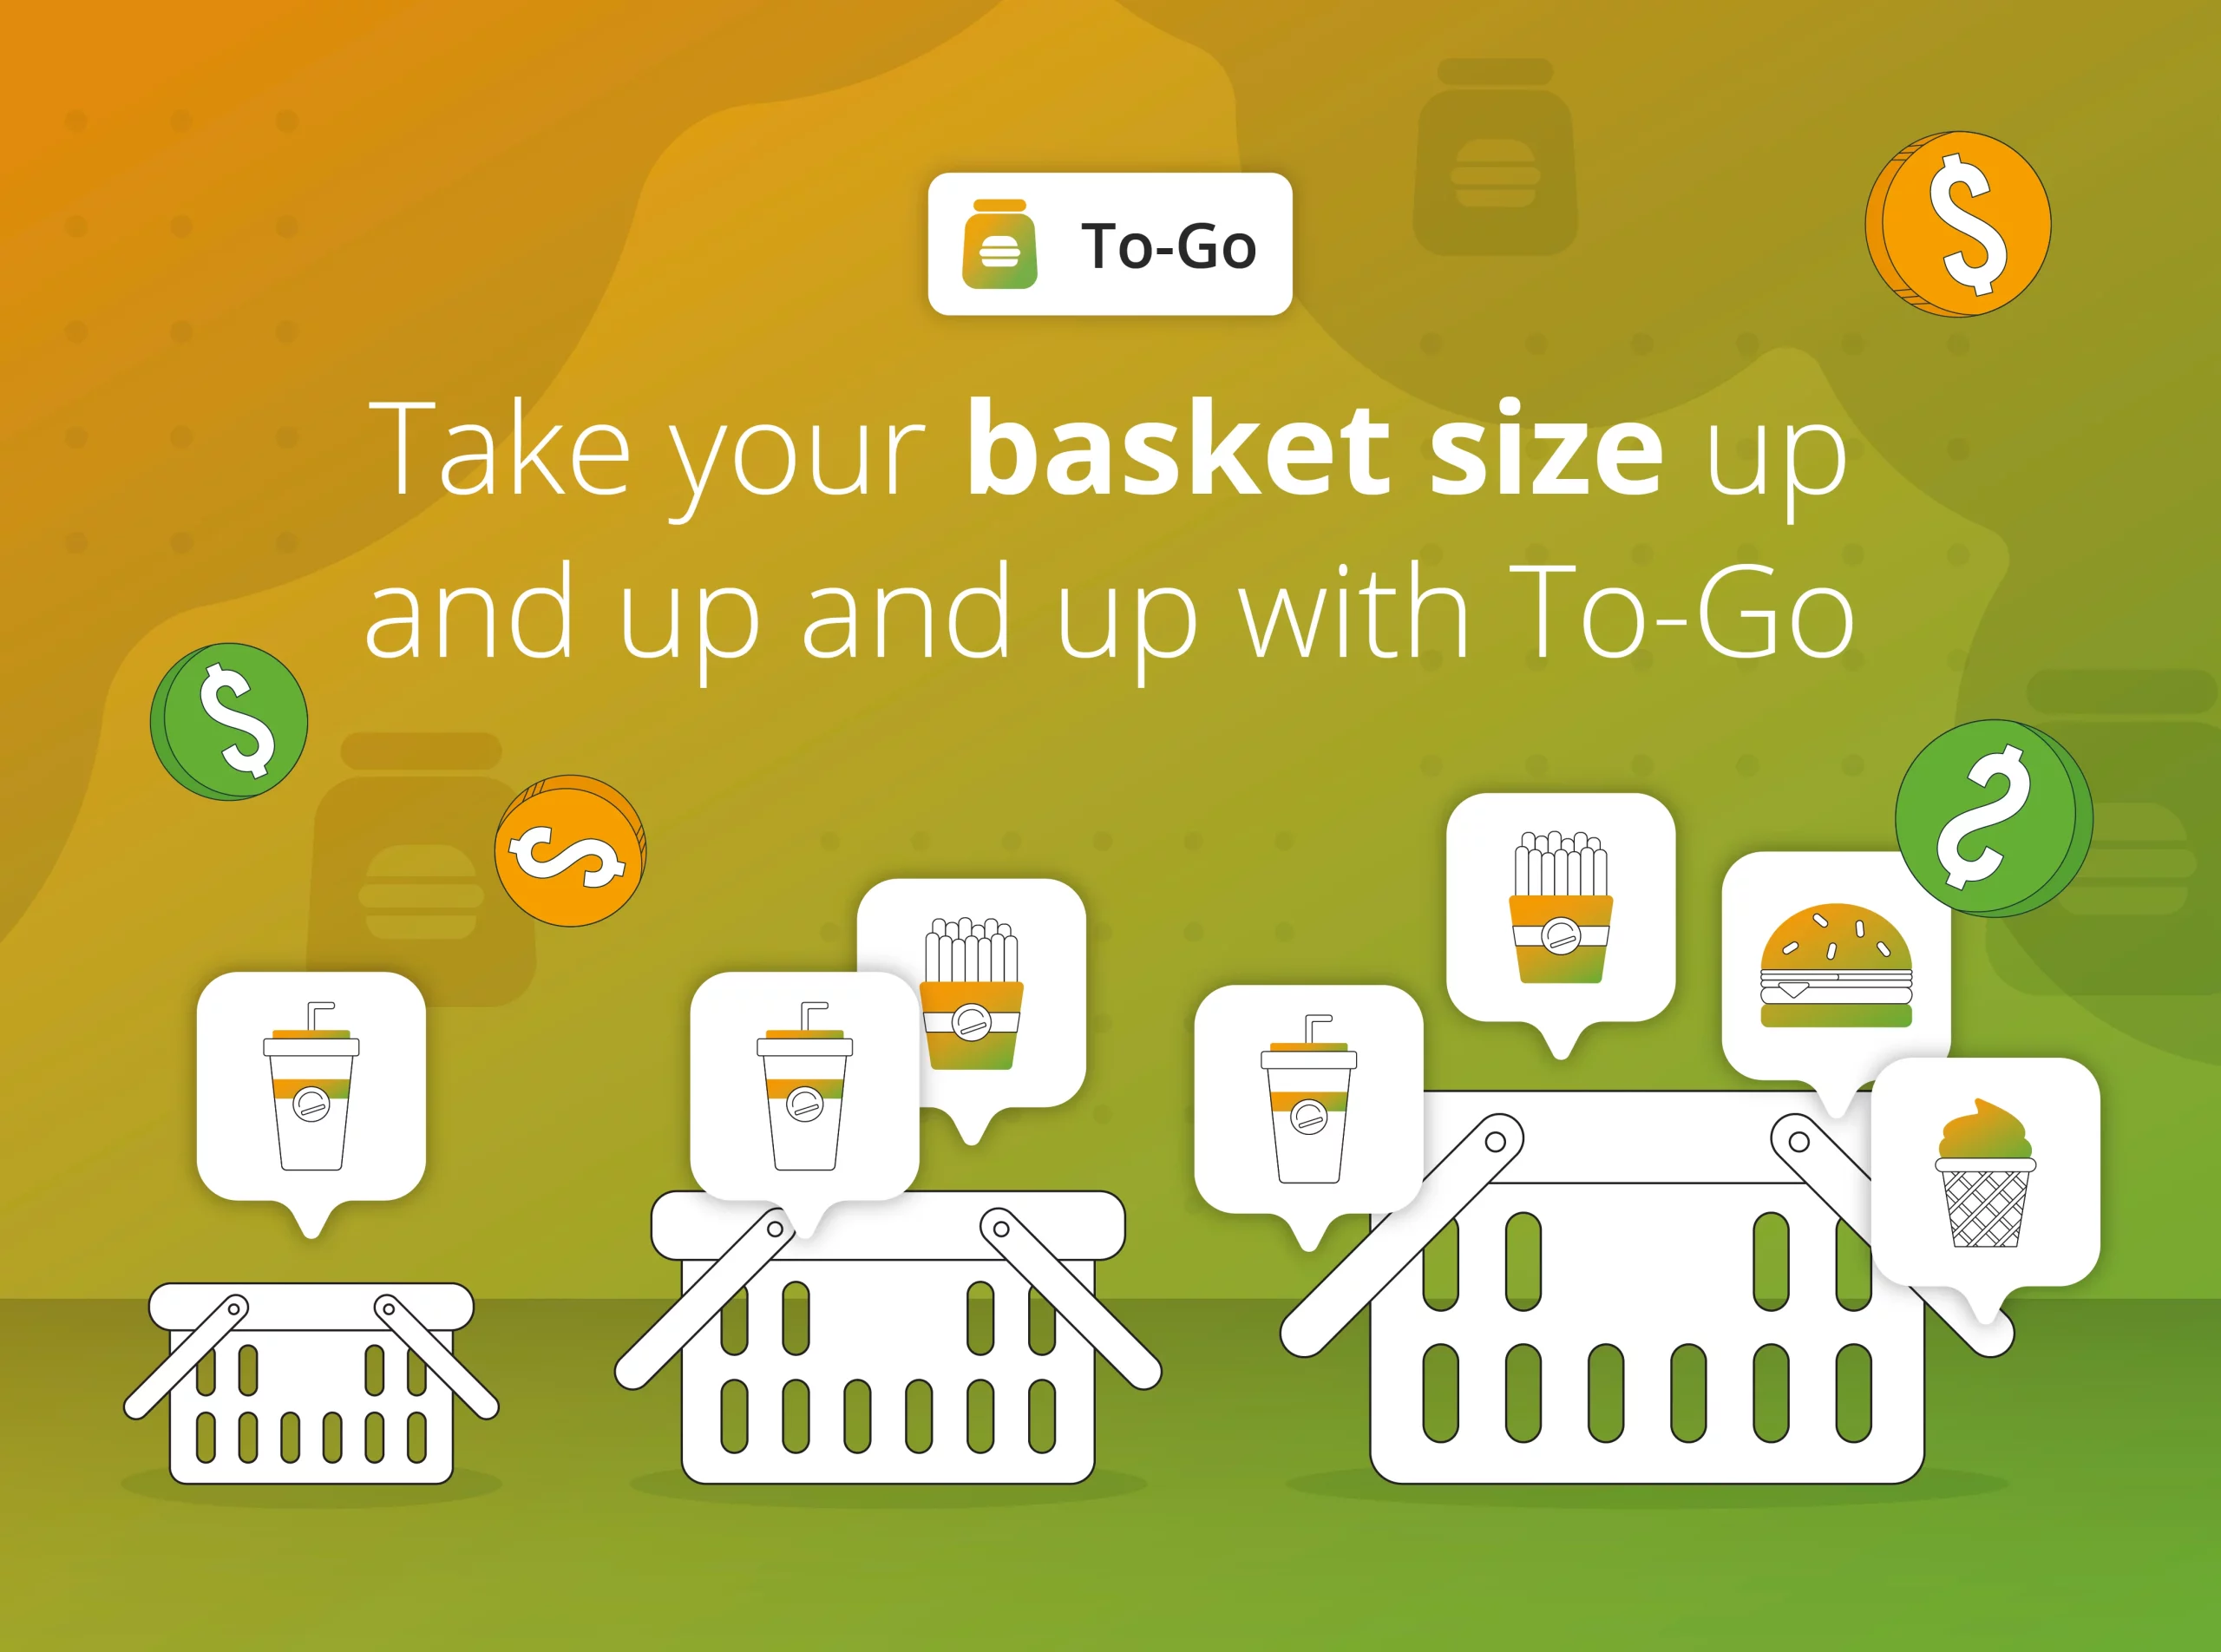 How To-Go takes your basket size up and up and up